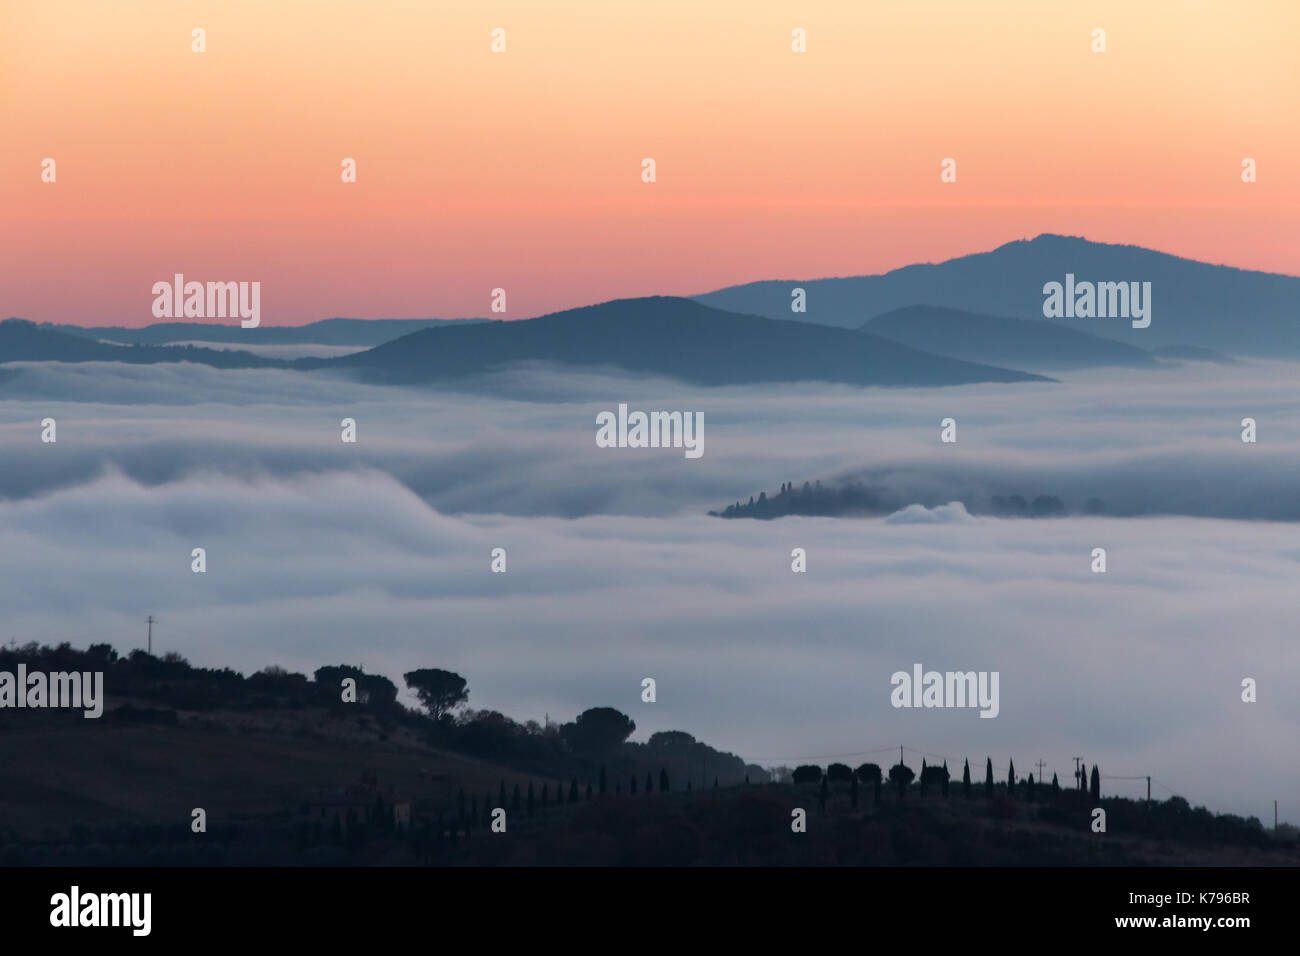 A valley filled by fog at sunset, with some hills and trees in the foreground and other hills and mountains in the foreground Stock Photo